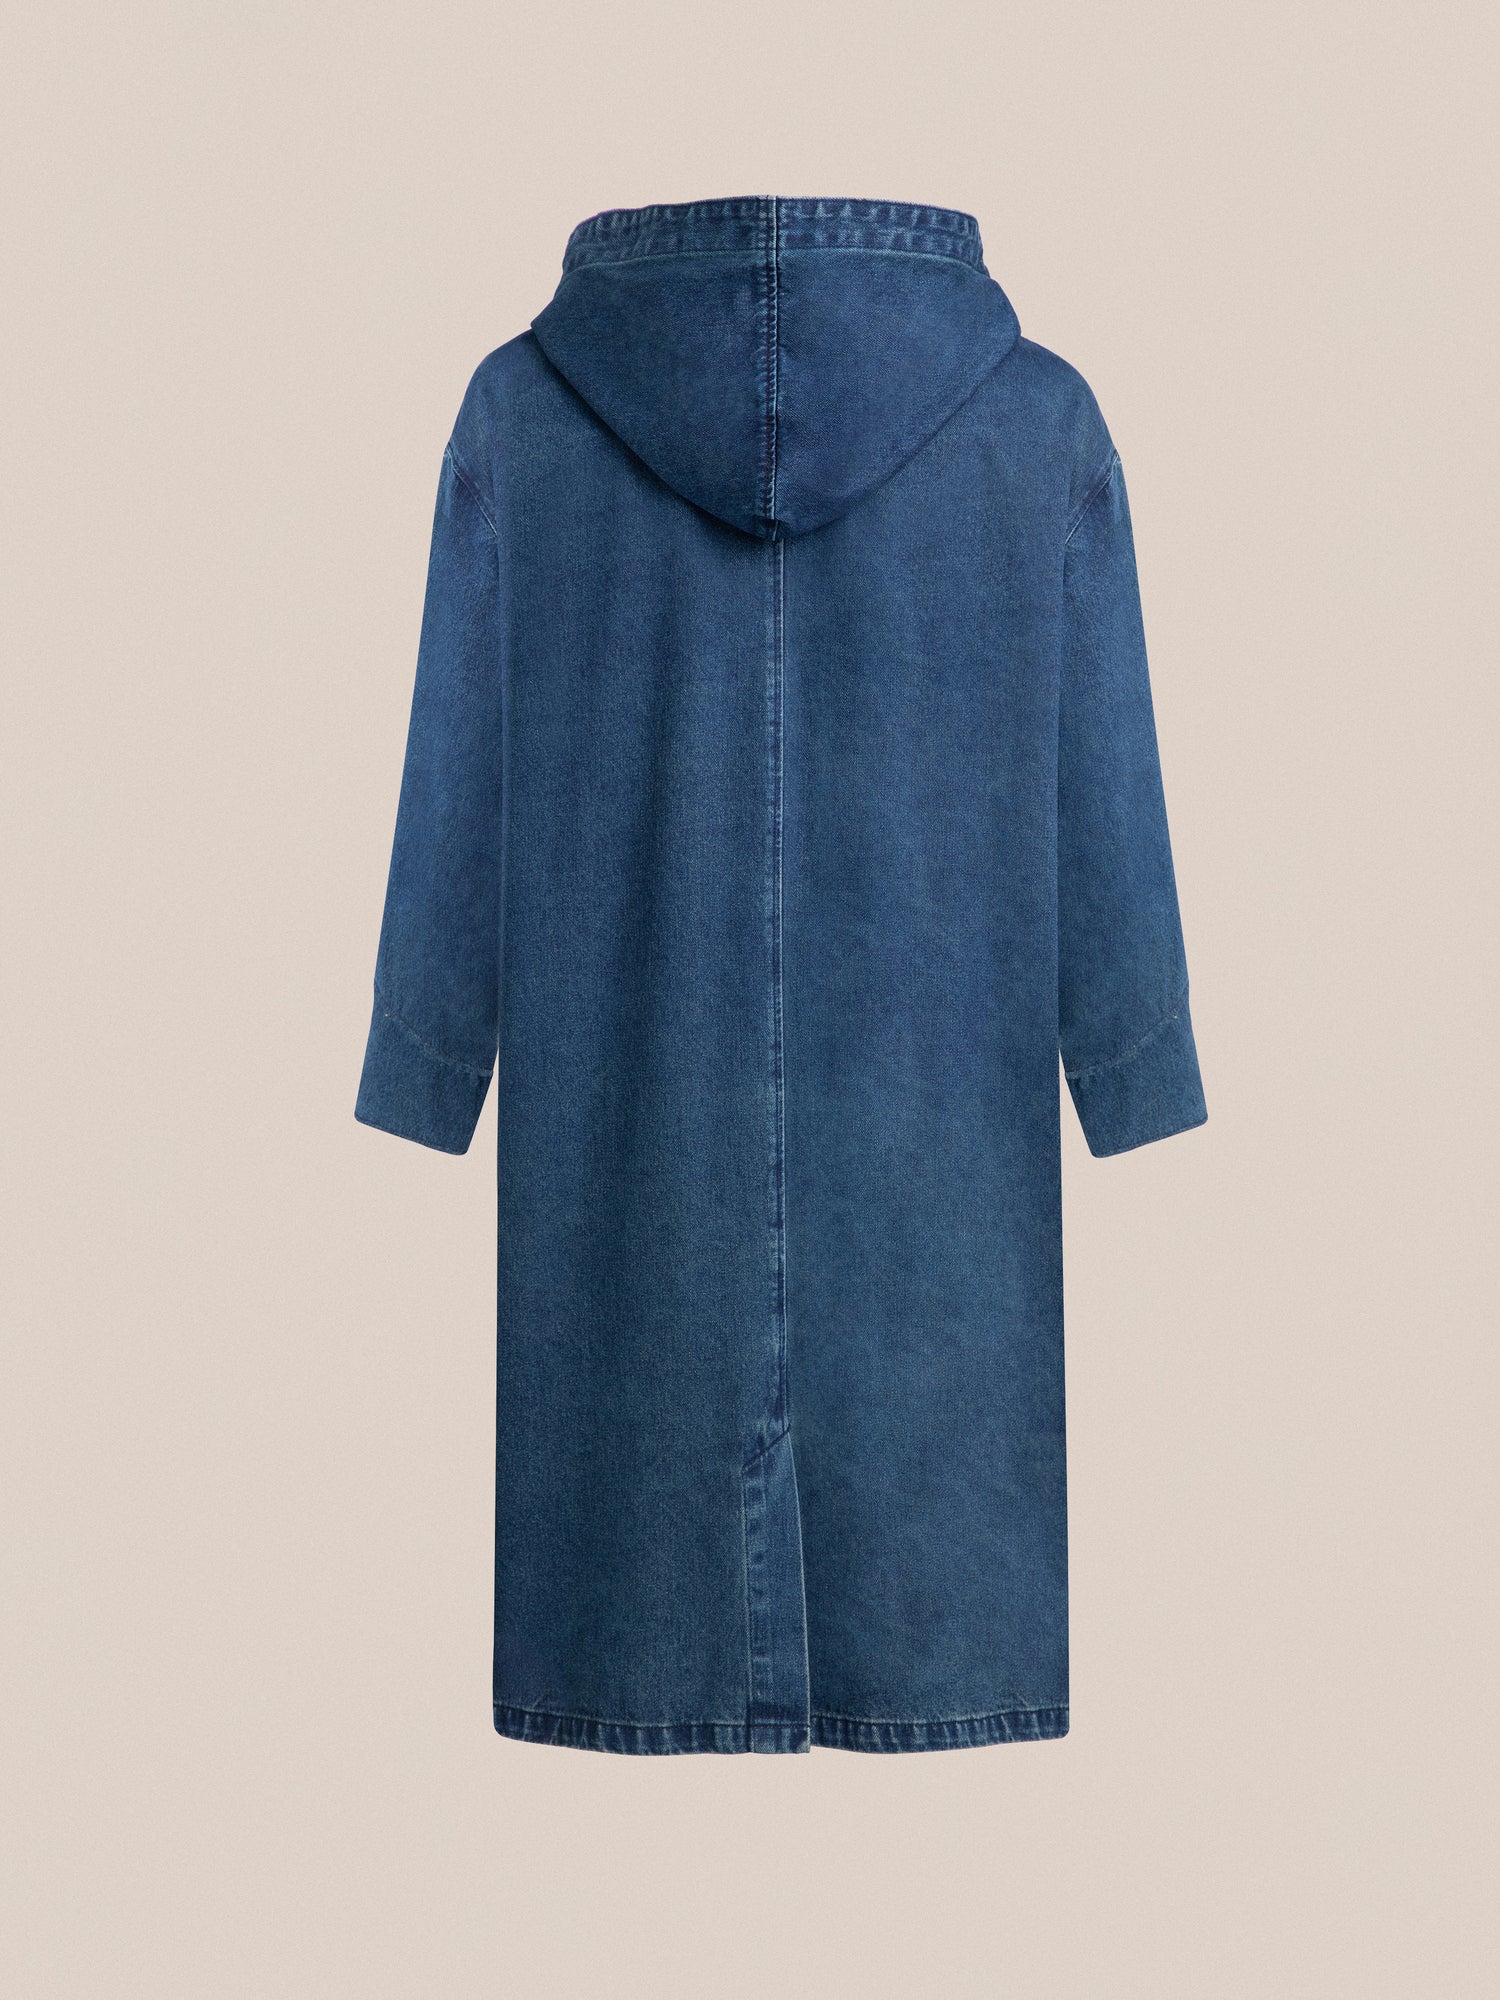 A vintage Sargasso Denim Buckle Coat with a hooded hood by Found.